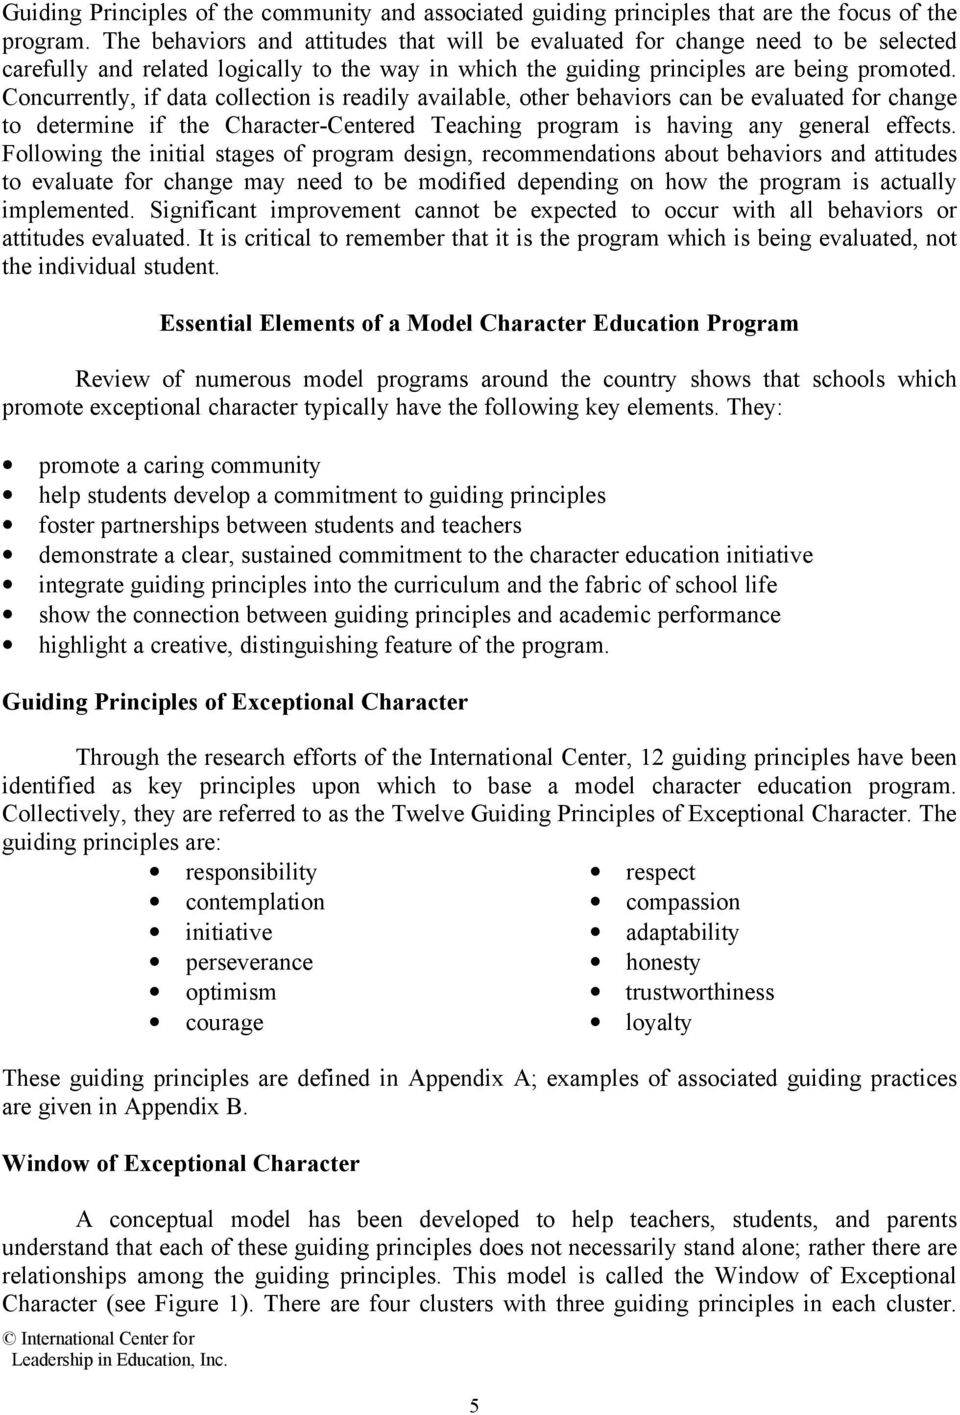 Concurrently, if data collection is readily available, other behaviors can be evaluated for change to determine if the Character-Centered Teaching program is having any general effects.